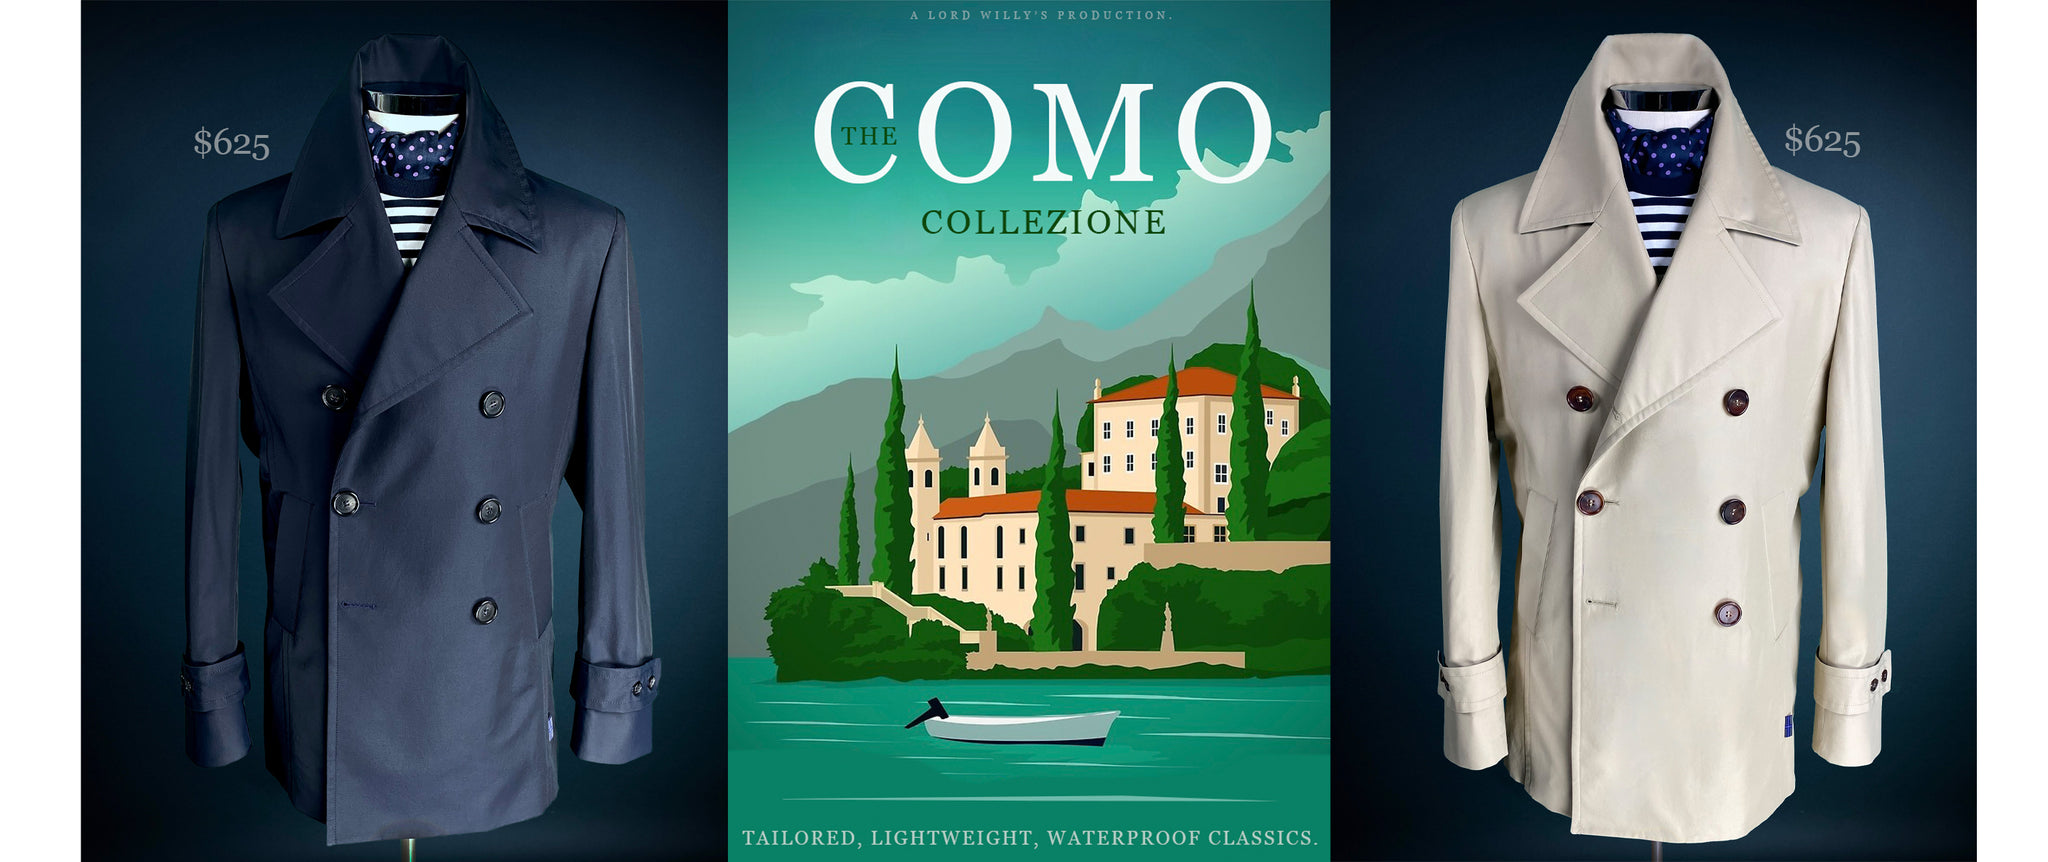 2 Peacoats are shown. One in navy, the other in tan. They are priced at $625 each. There is an illustration of Lake Como. 